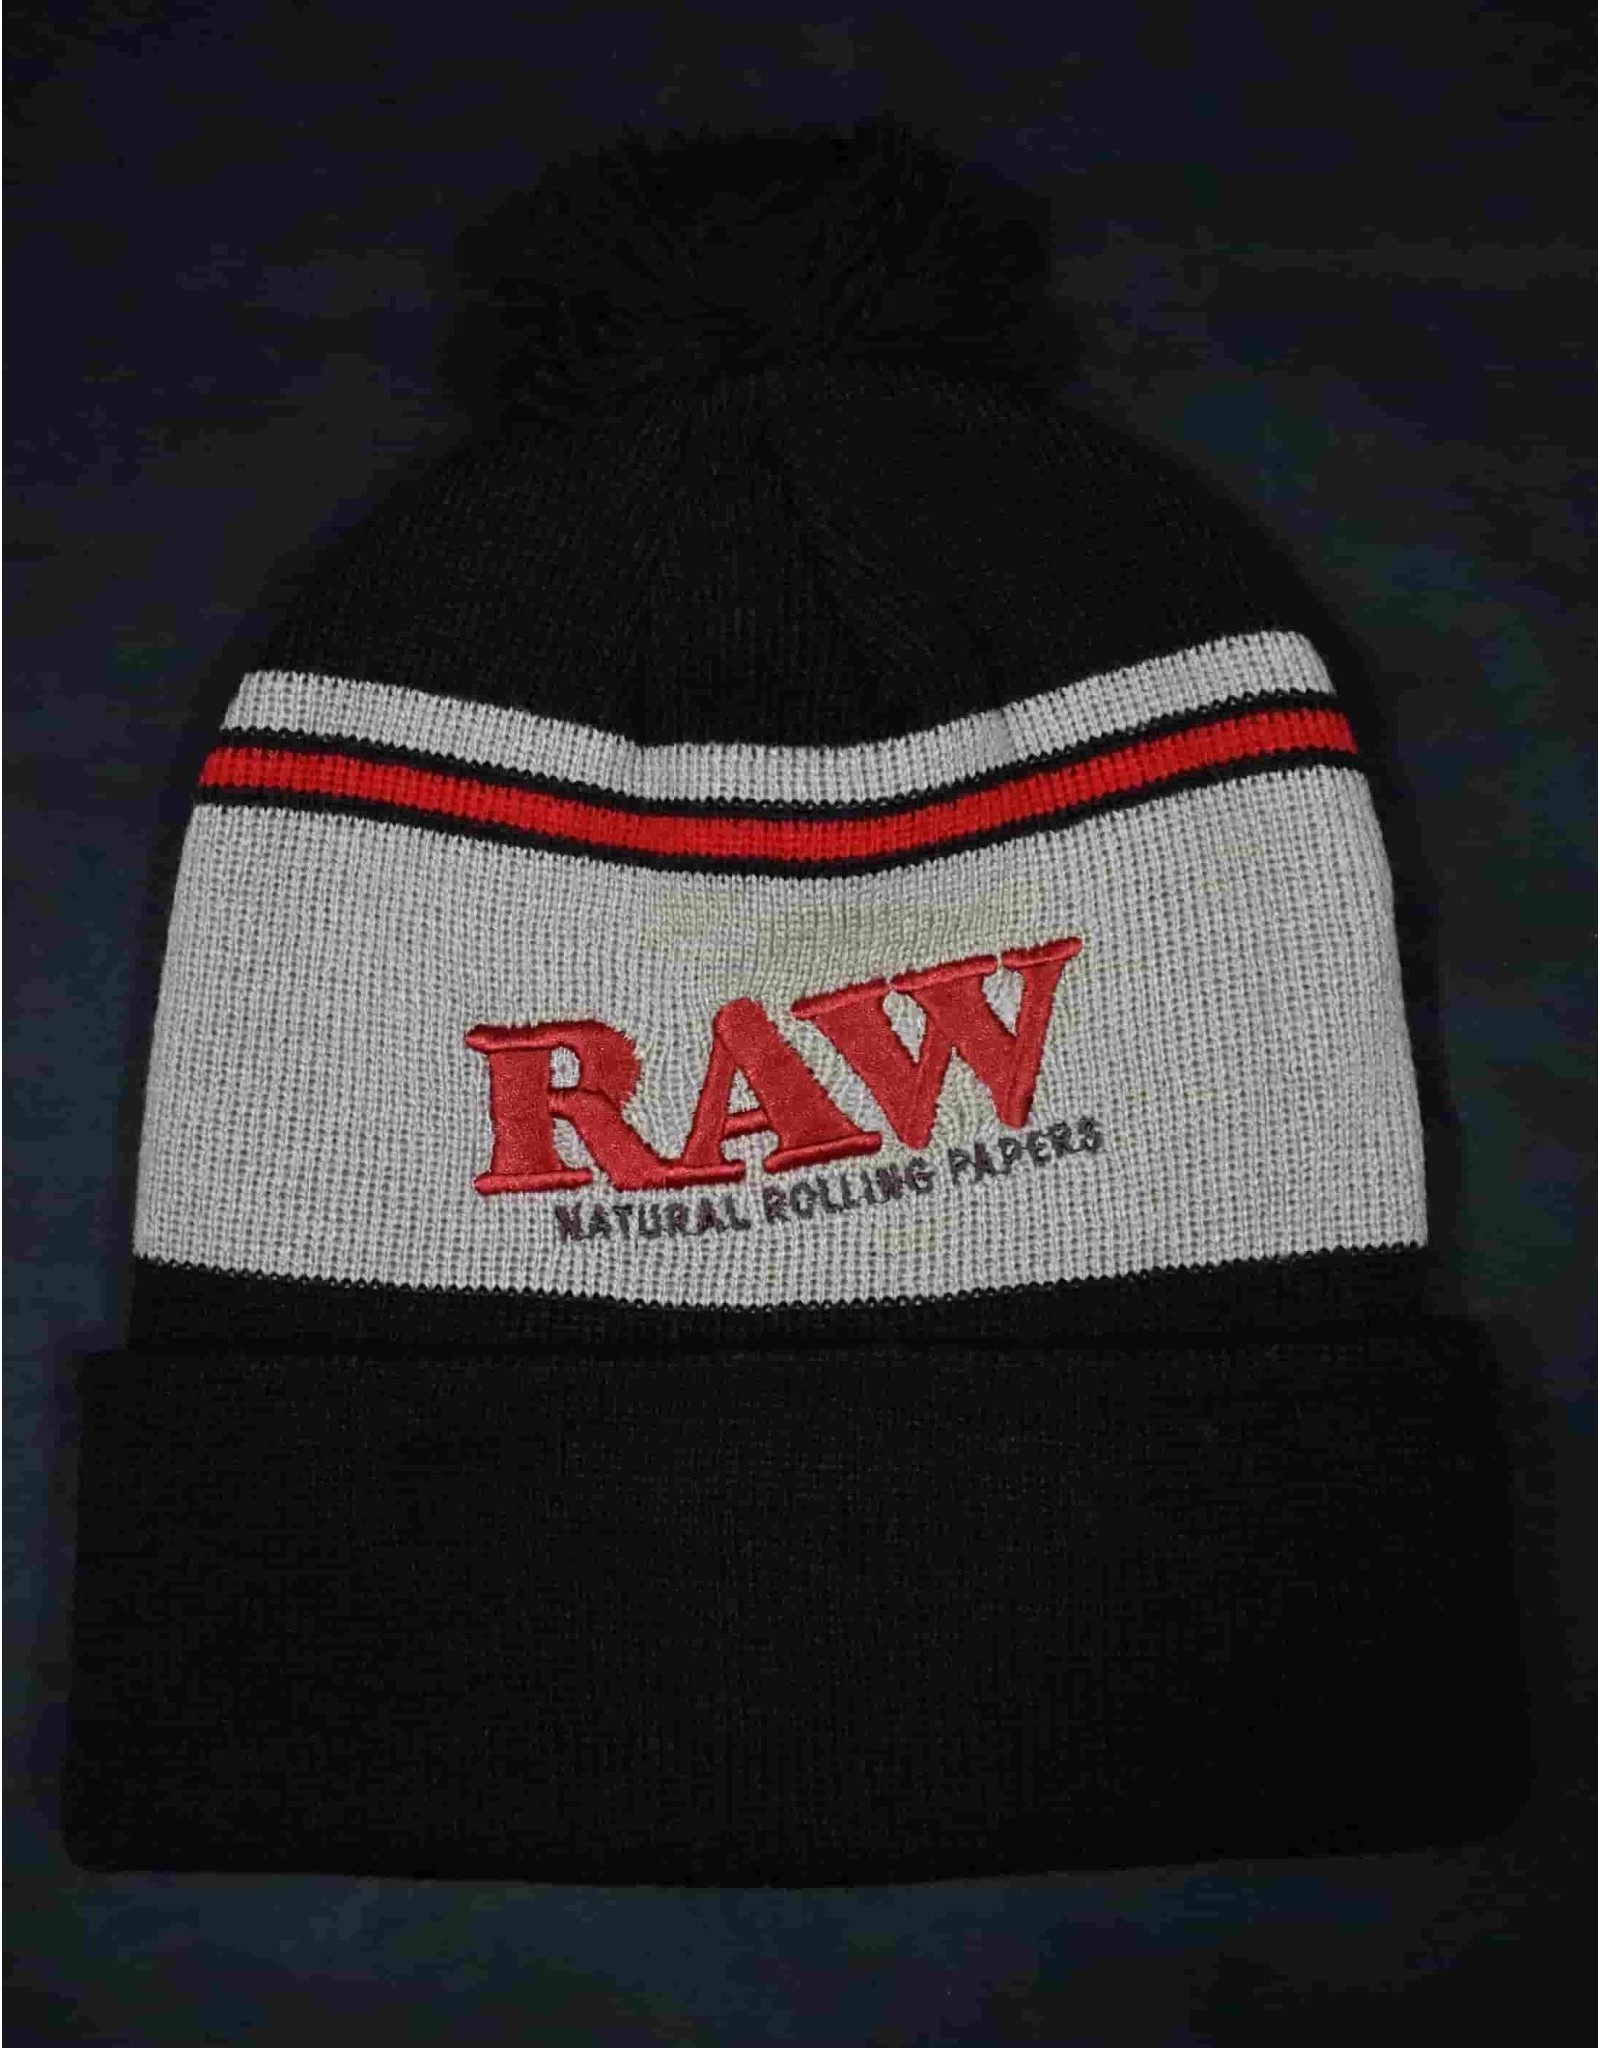 Raw Raw Pompom Beanie (Black and Brown w/ Logo) The Natural Way to Roll